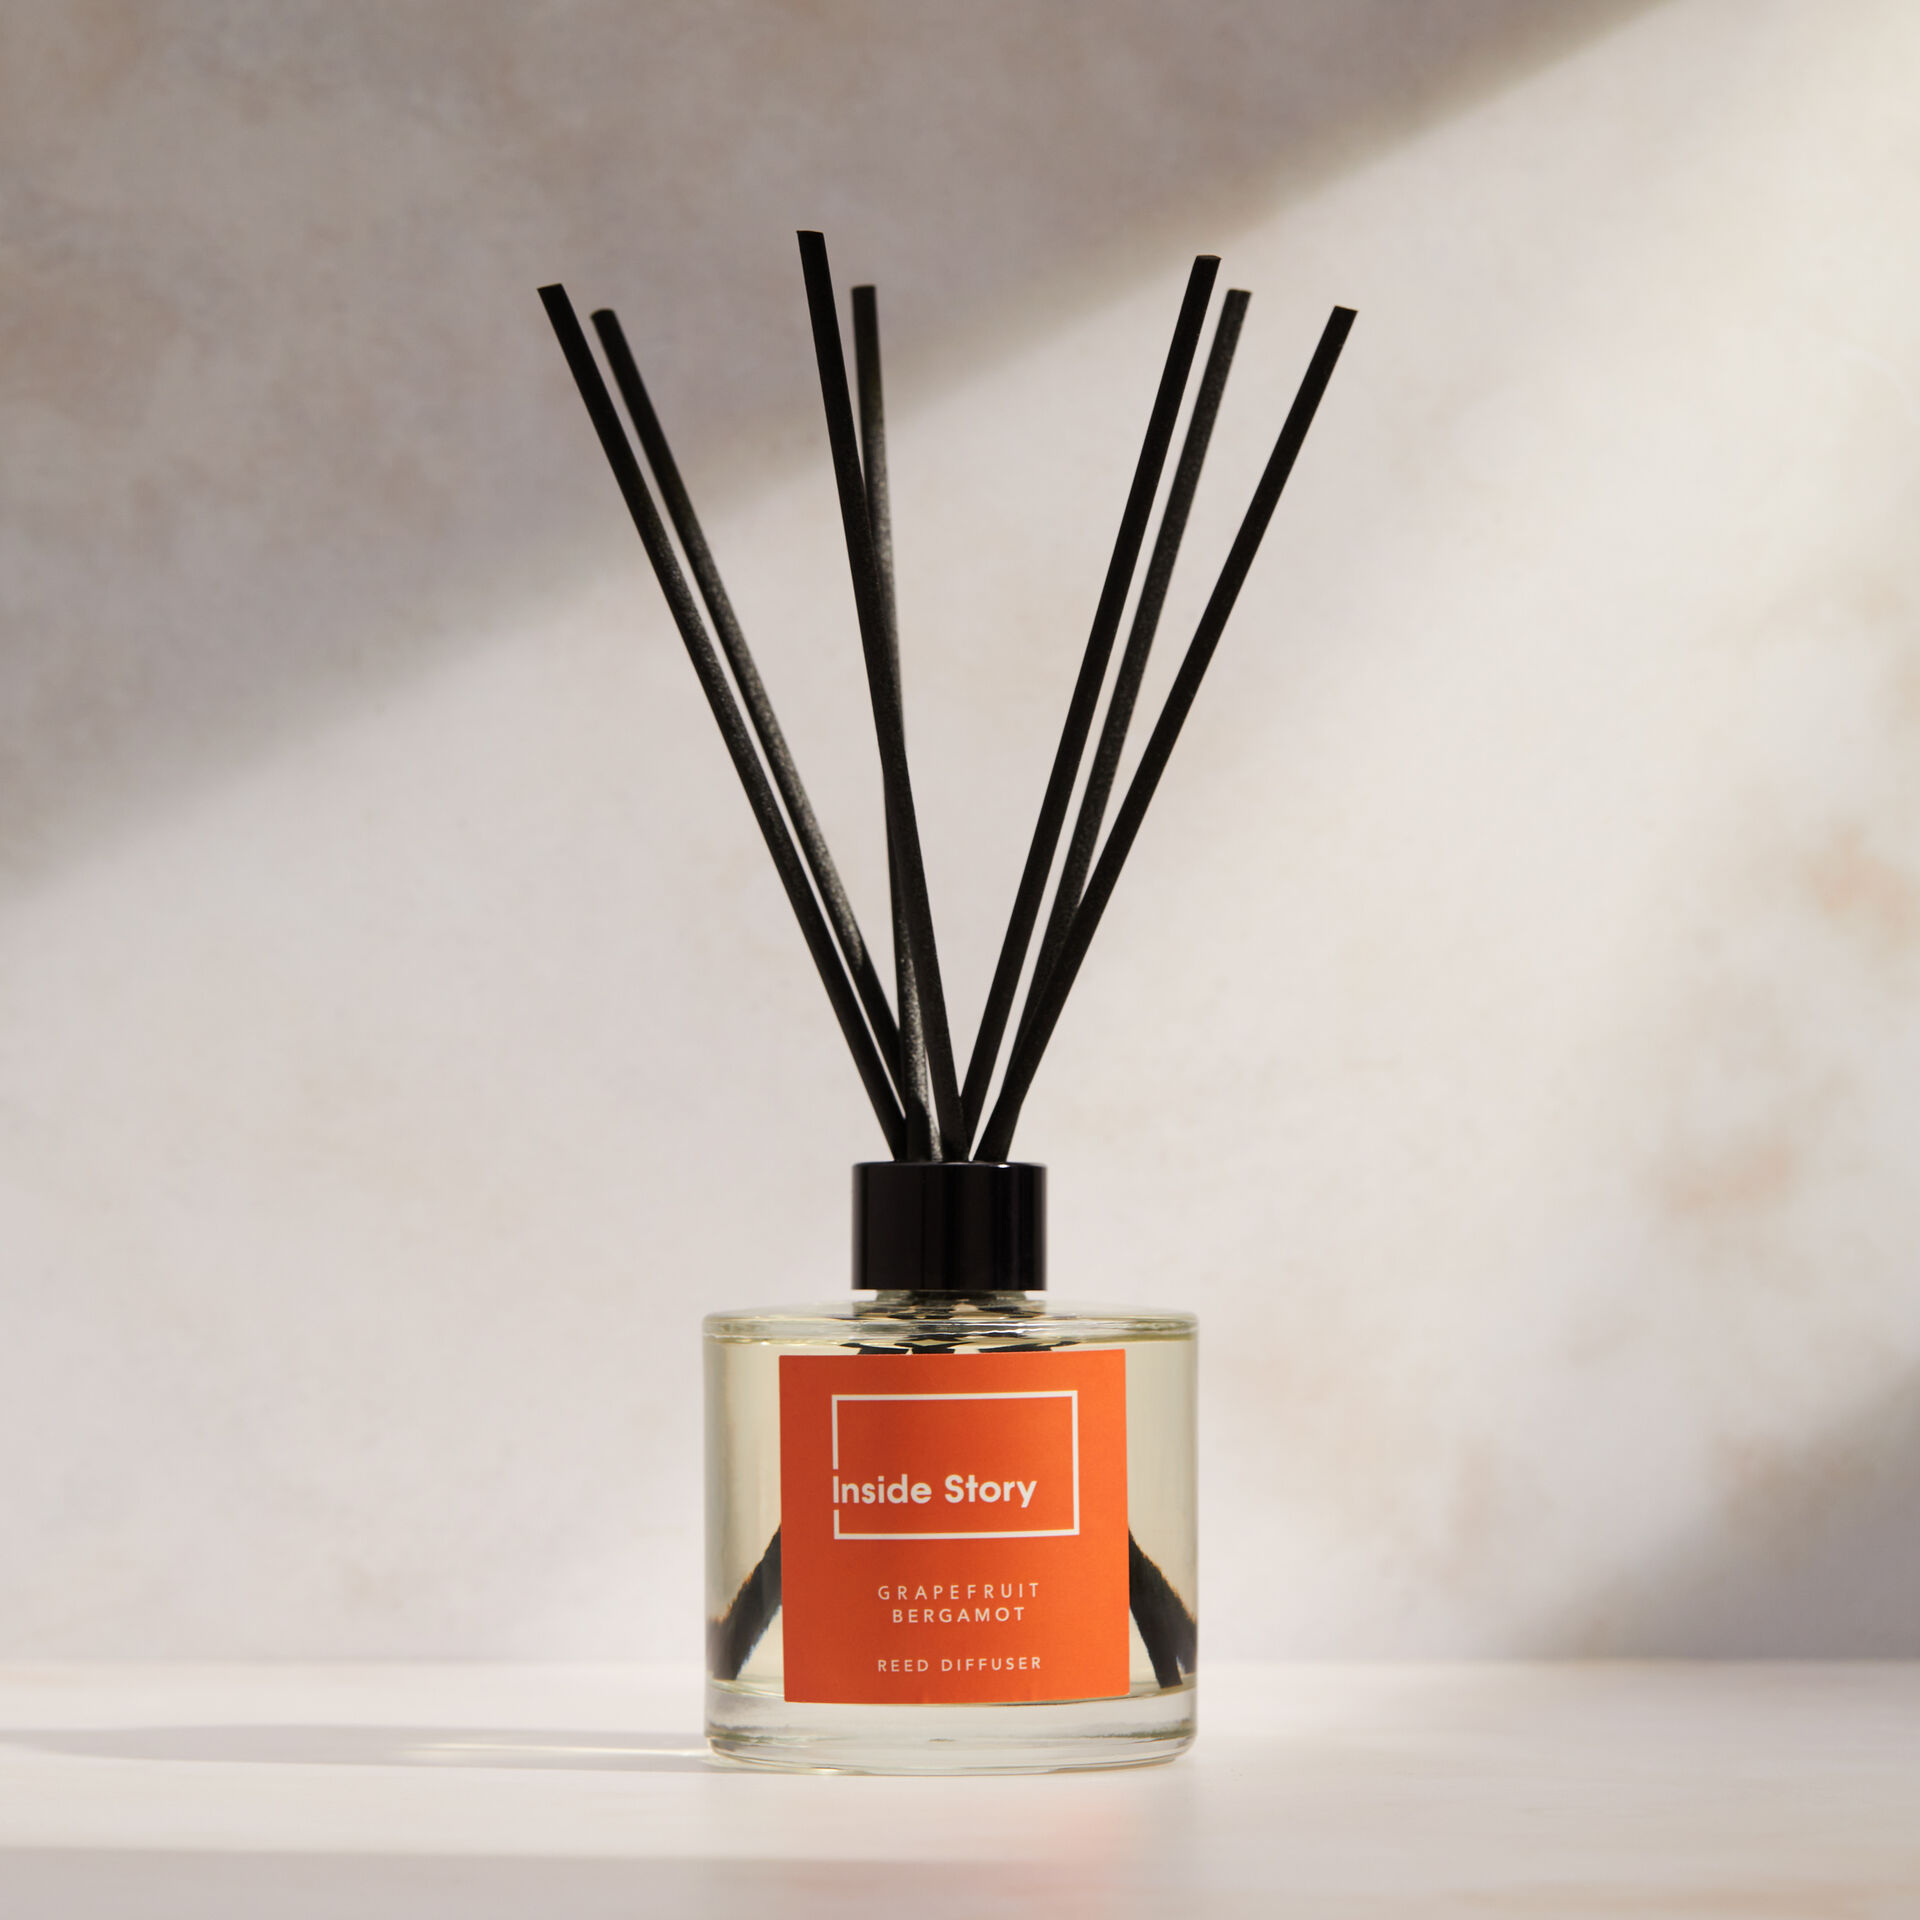 ${product-id}-Grapefruit And Bergamot Diffuser-Neutral-${view-type}